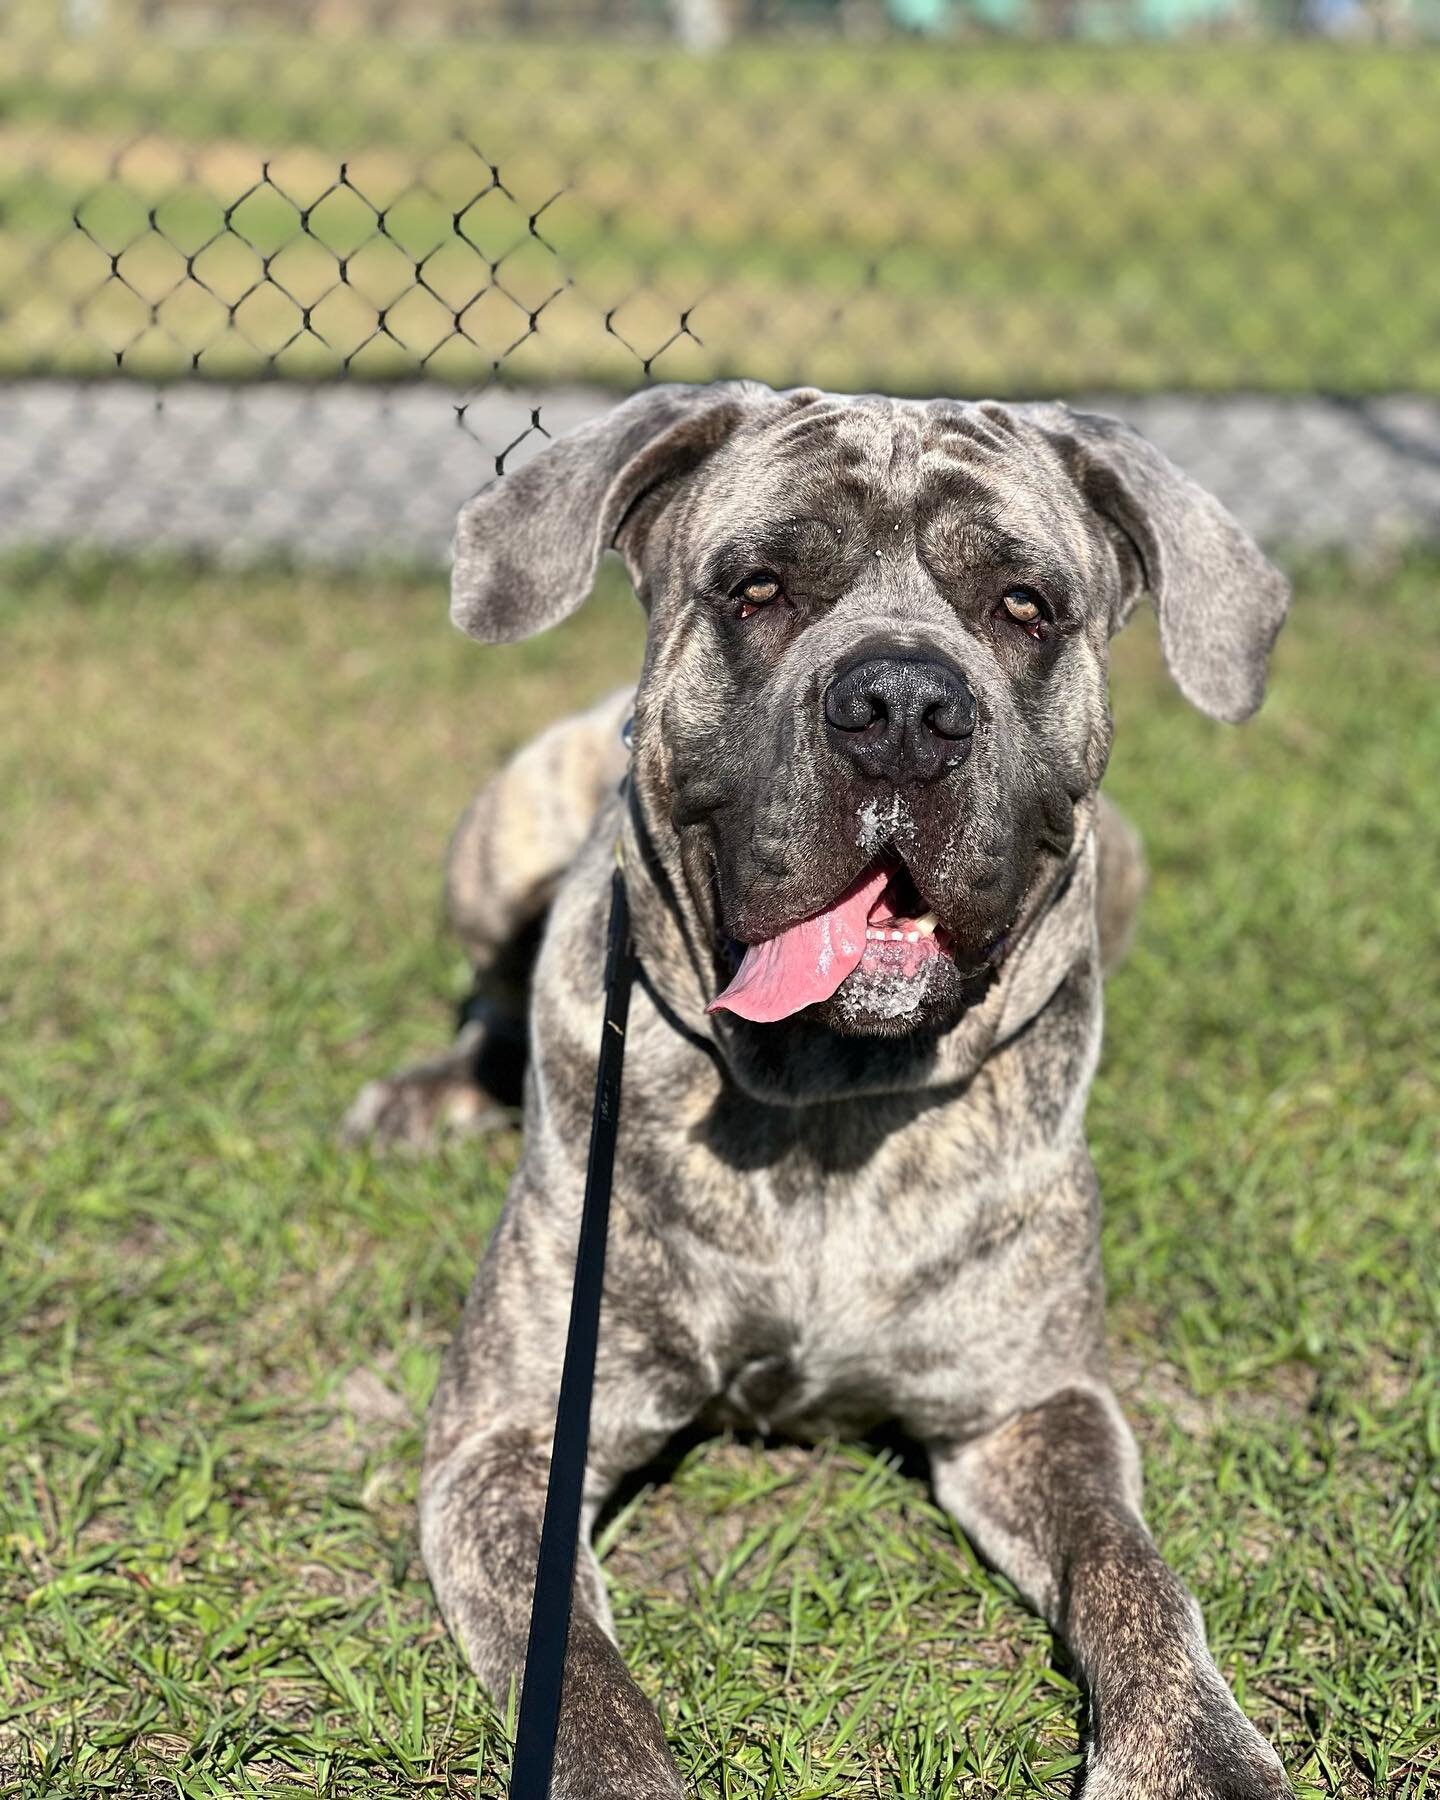 Blayze has been with us just over two weeks and it&rsquo;s been a ride! 🎢

When a Cane Corso comes in with reactivity issues it is so important to get that in check IMMEDIATELY and then the &ldquo;basic obedience &ldquo; program can begin. The breed